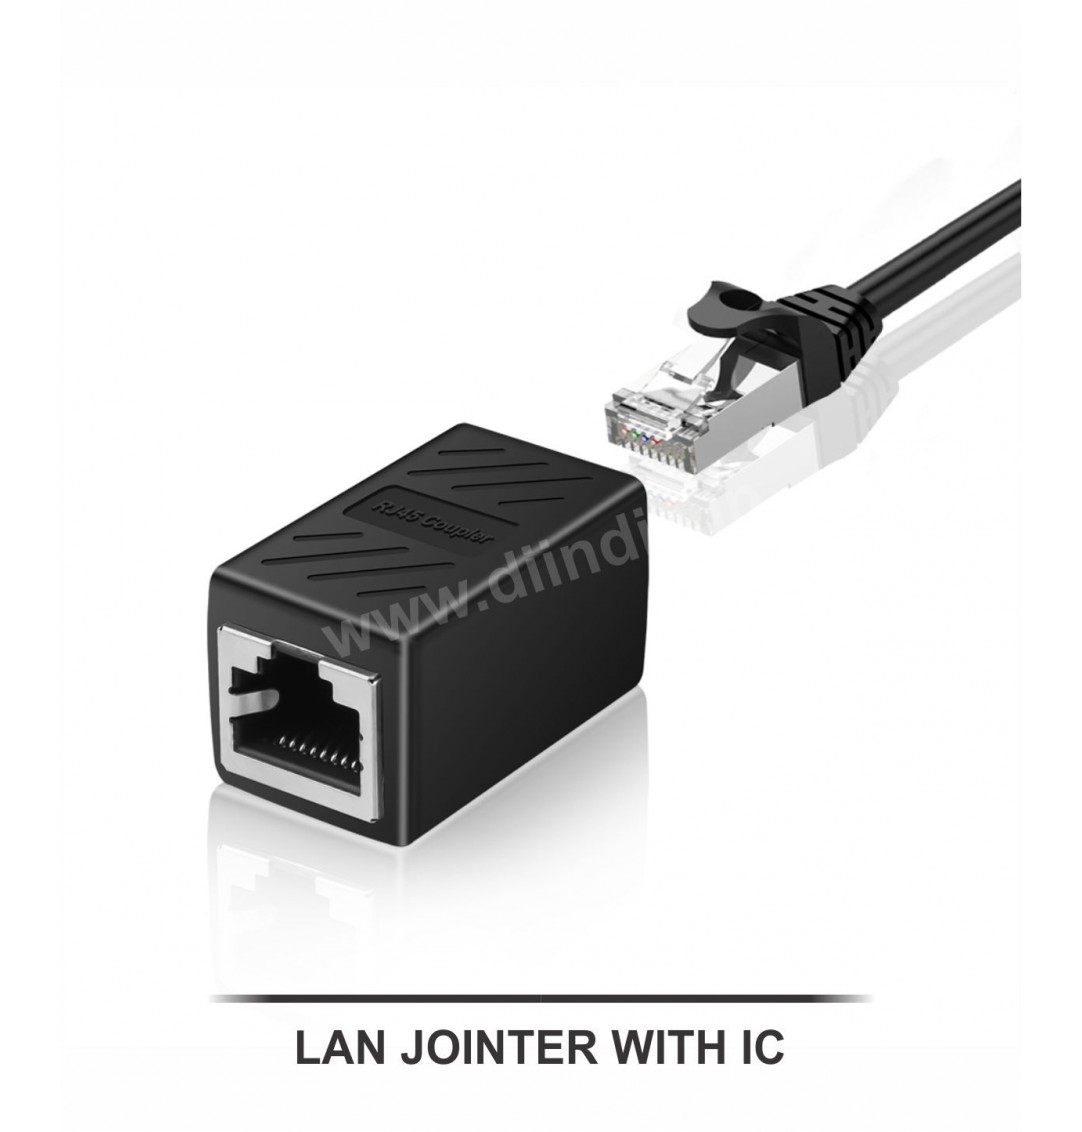 LAN JOINTER WITH IC